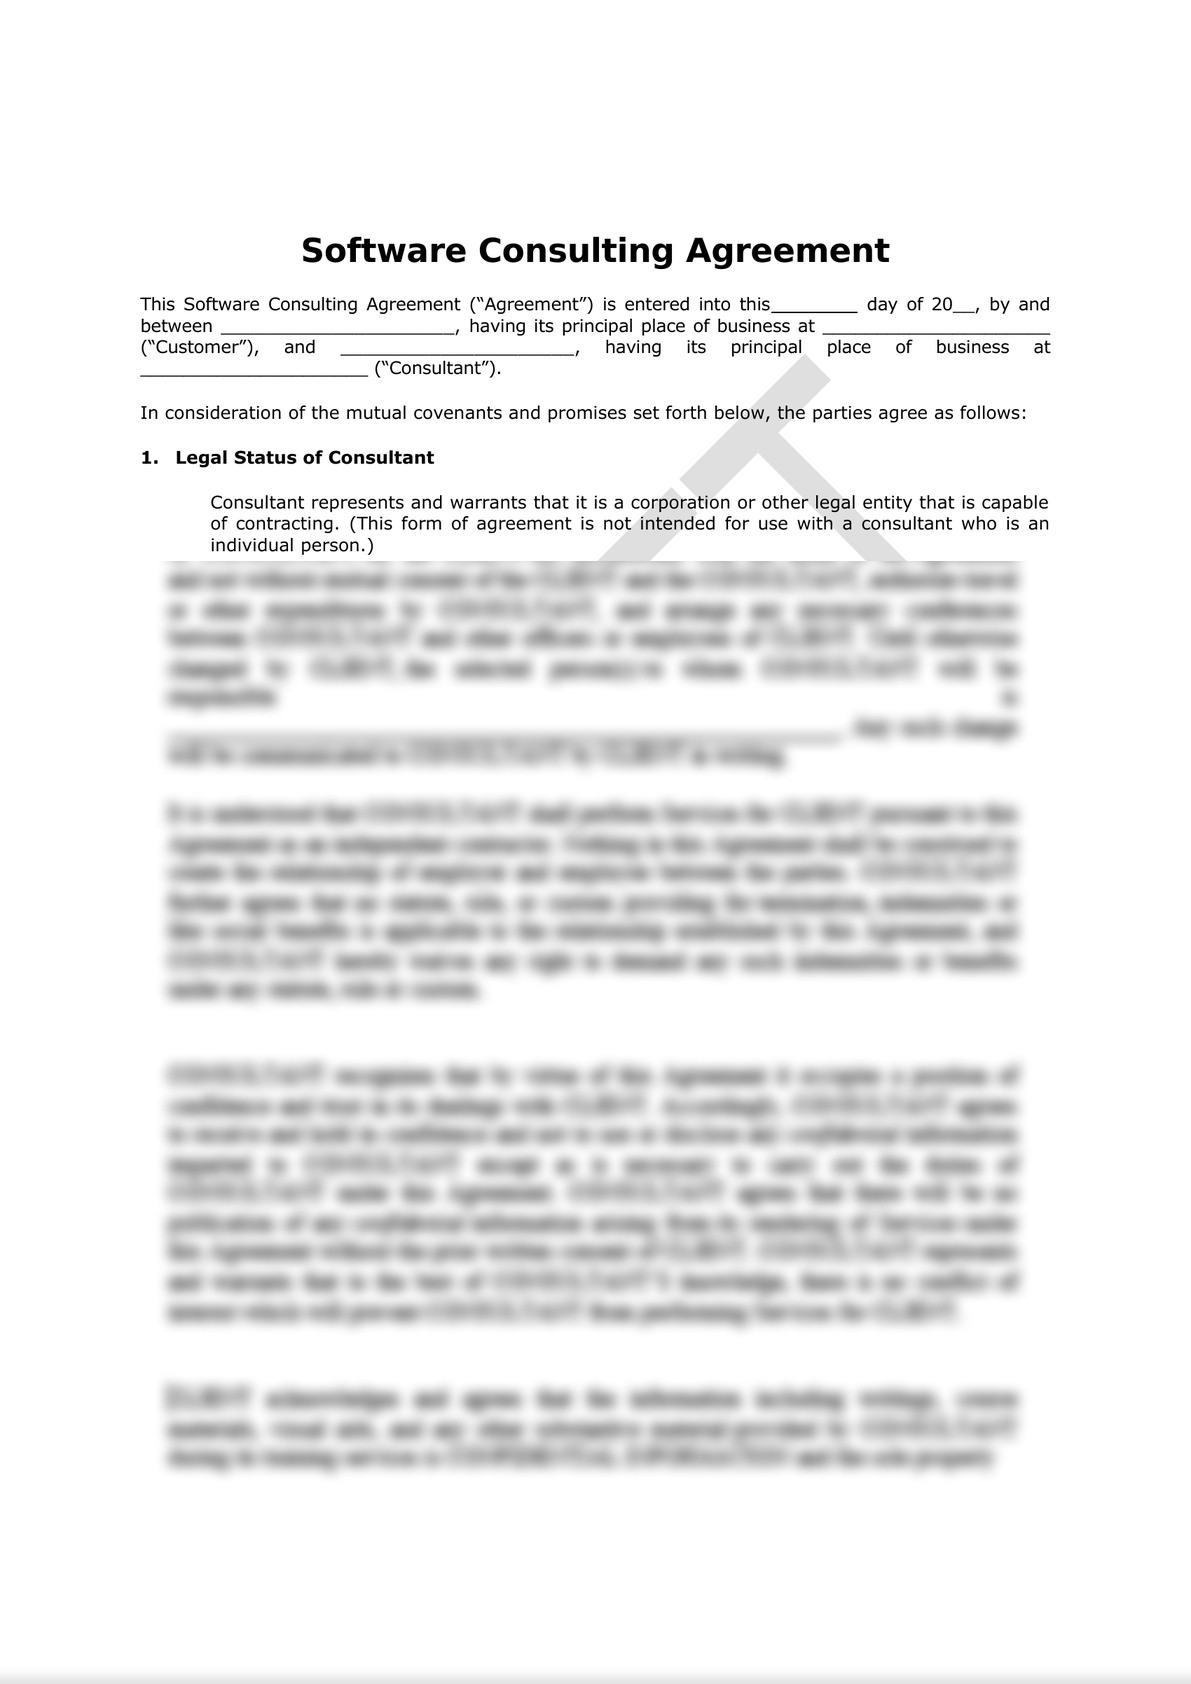 Software Consulting Agreement (Pro-Customer)-0